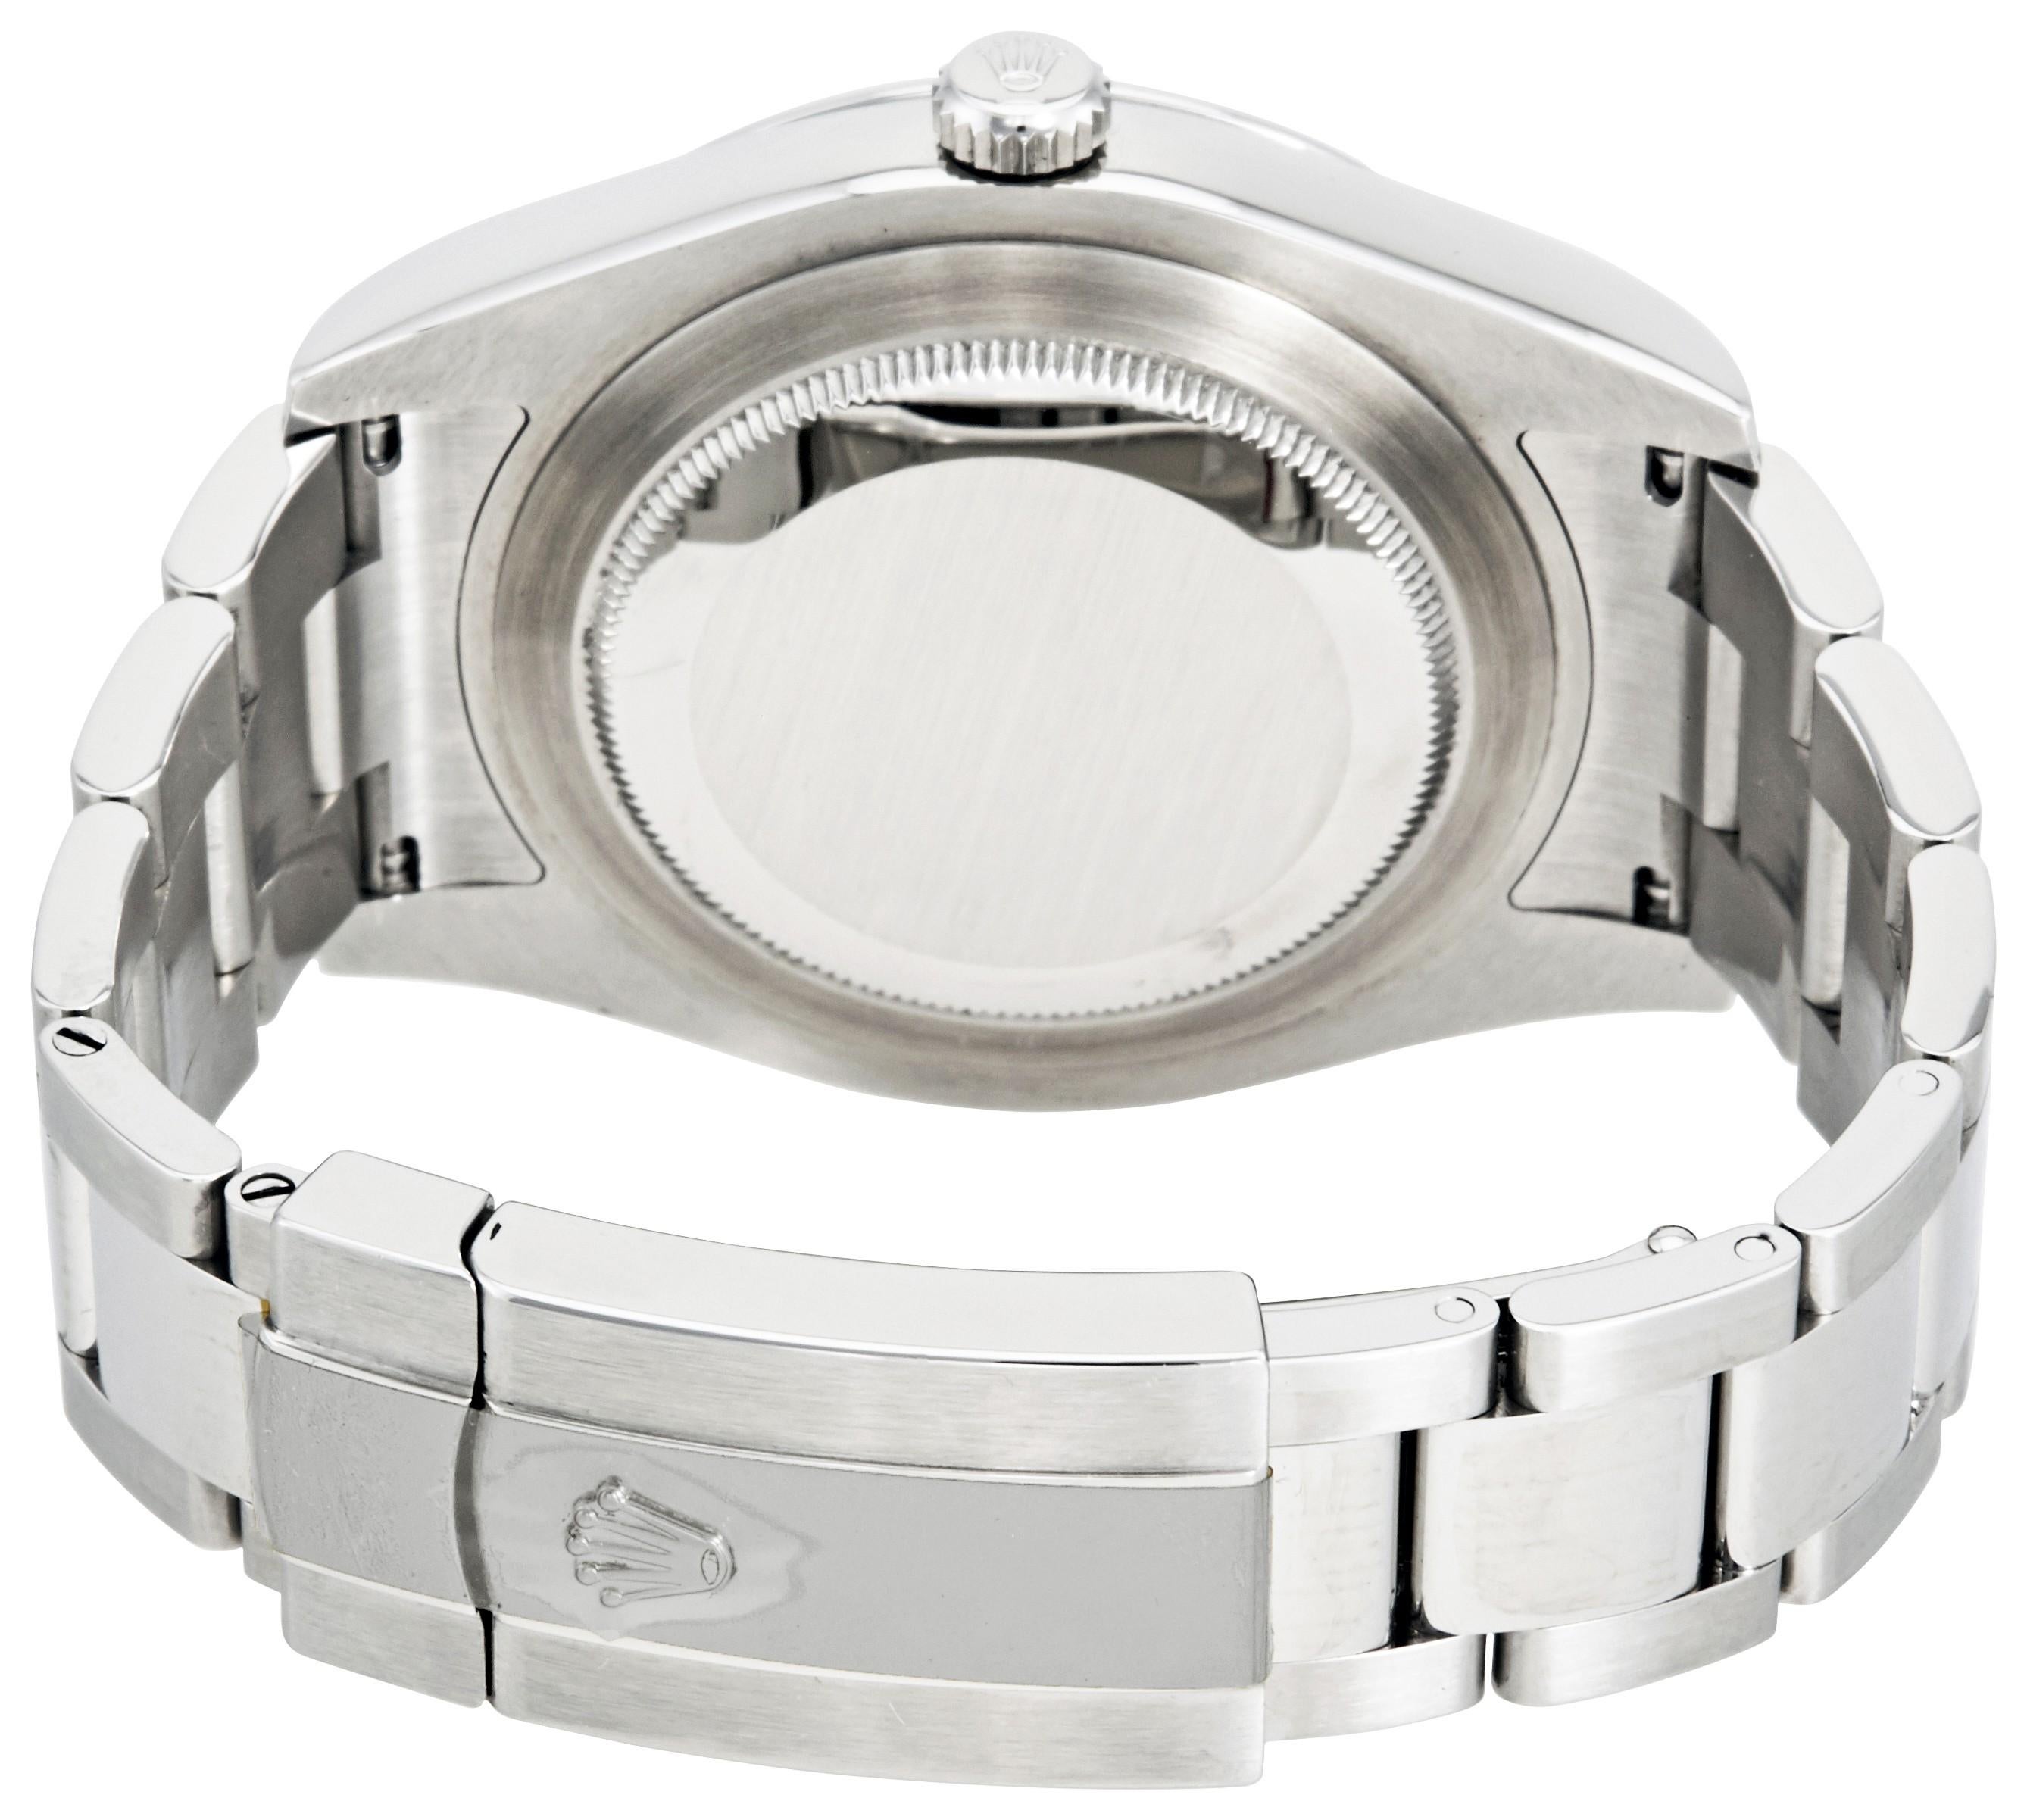 mother of pearl watch face men's